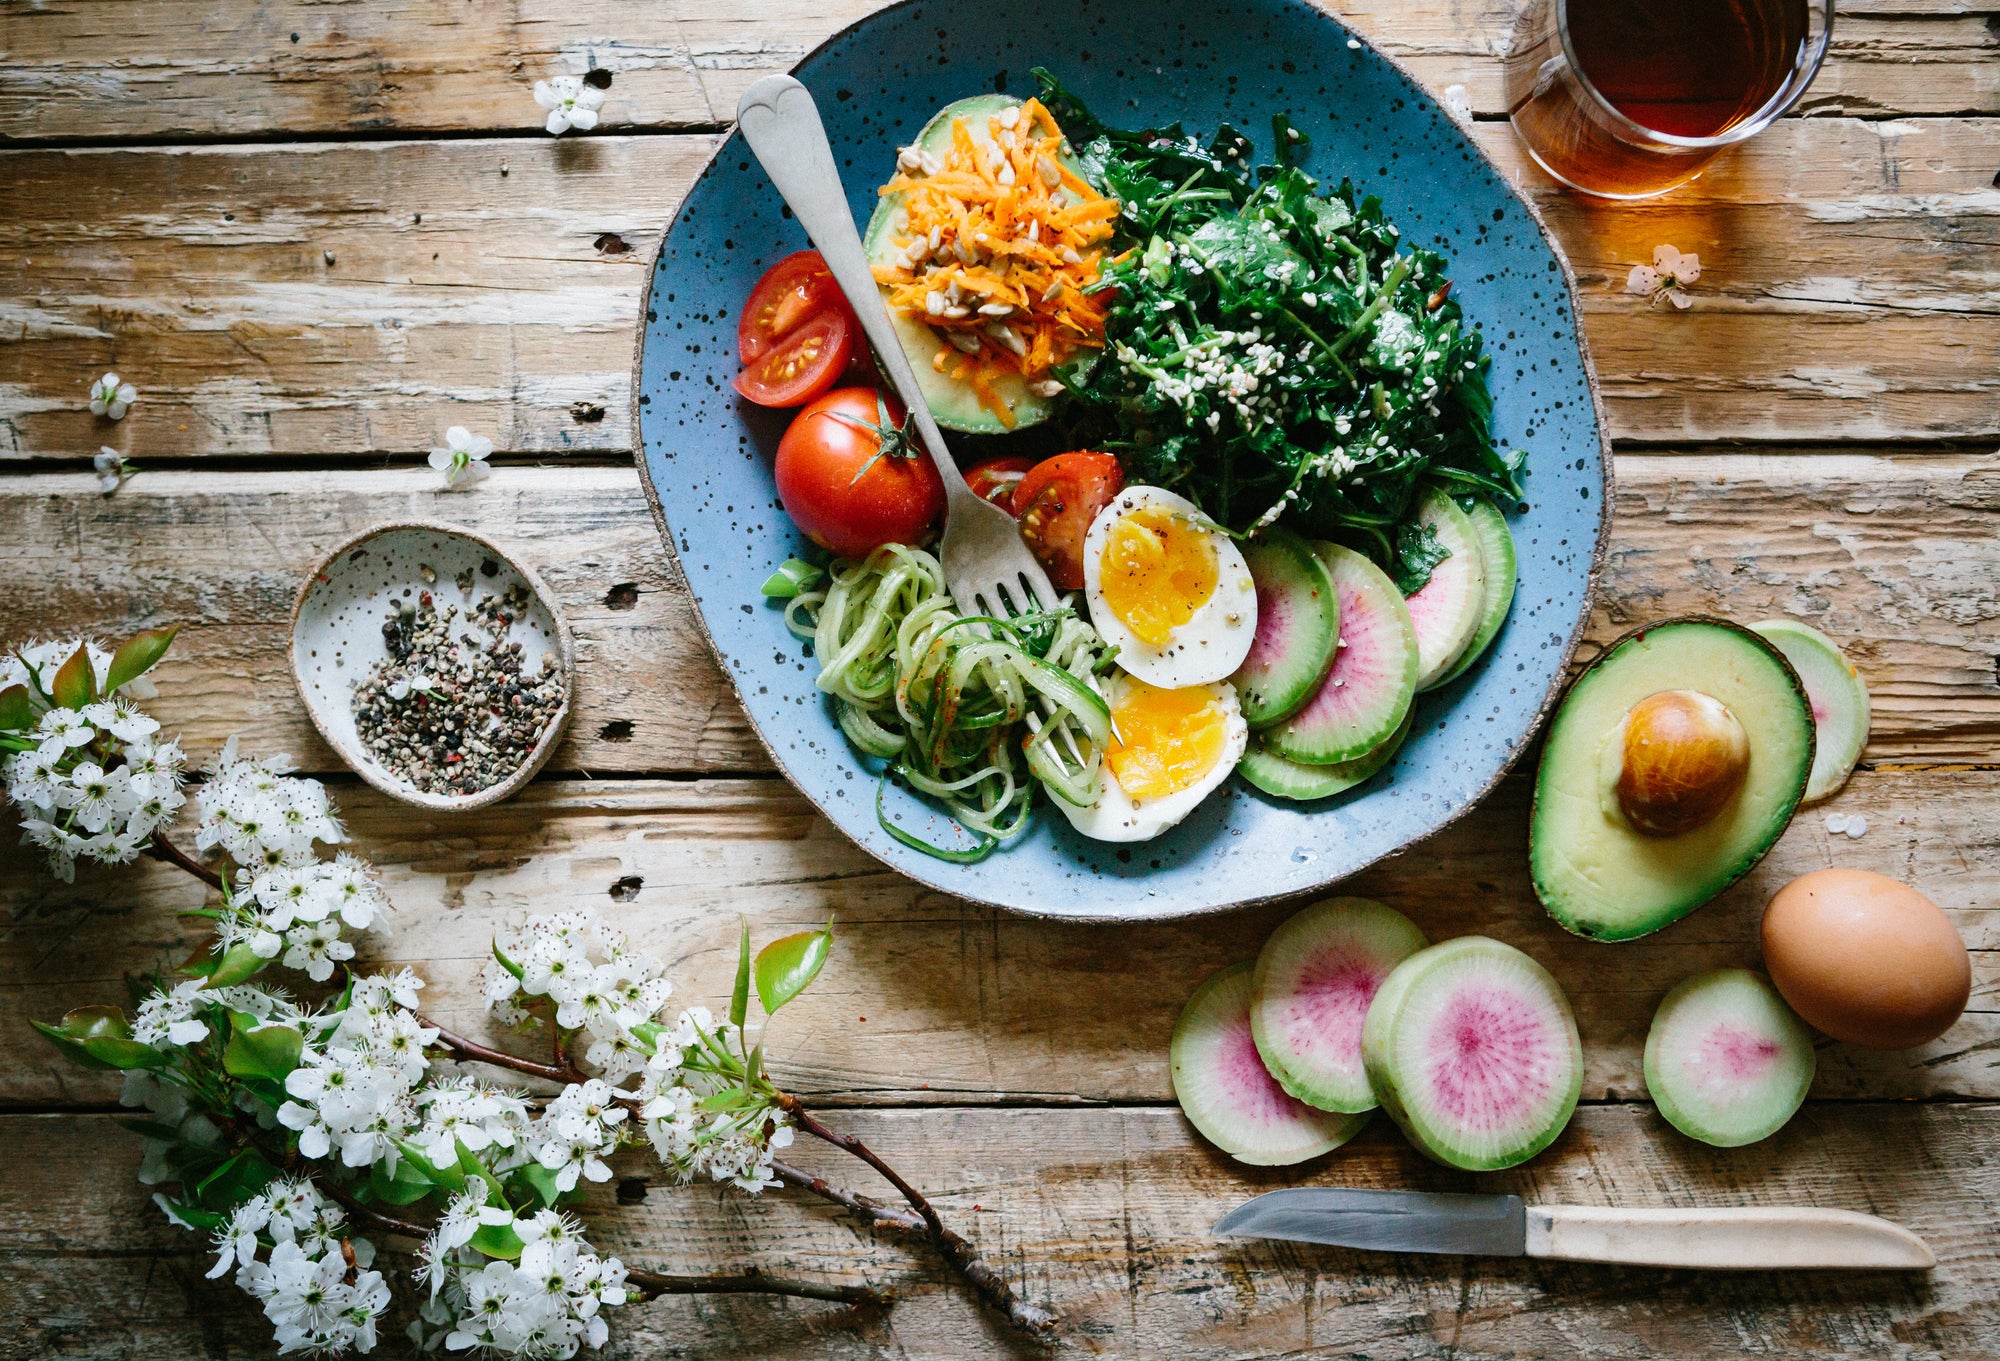 9 tips on supercharging your keto diet [PART 2]